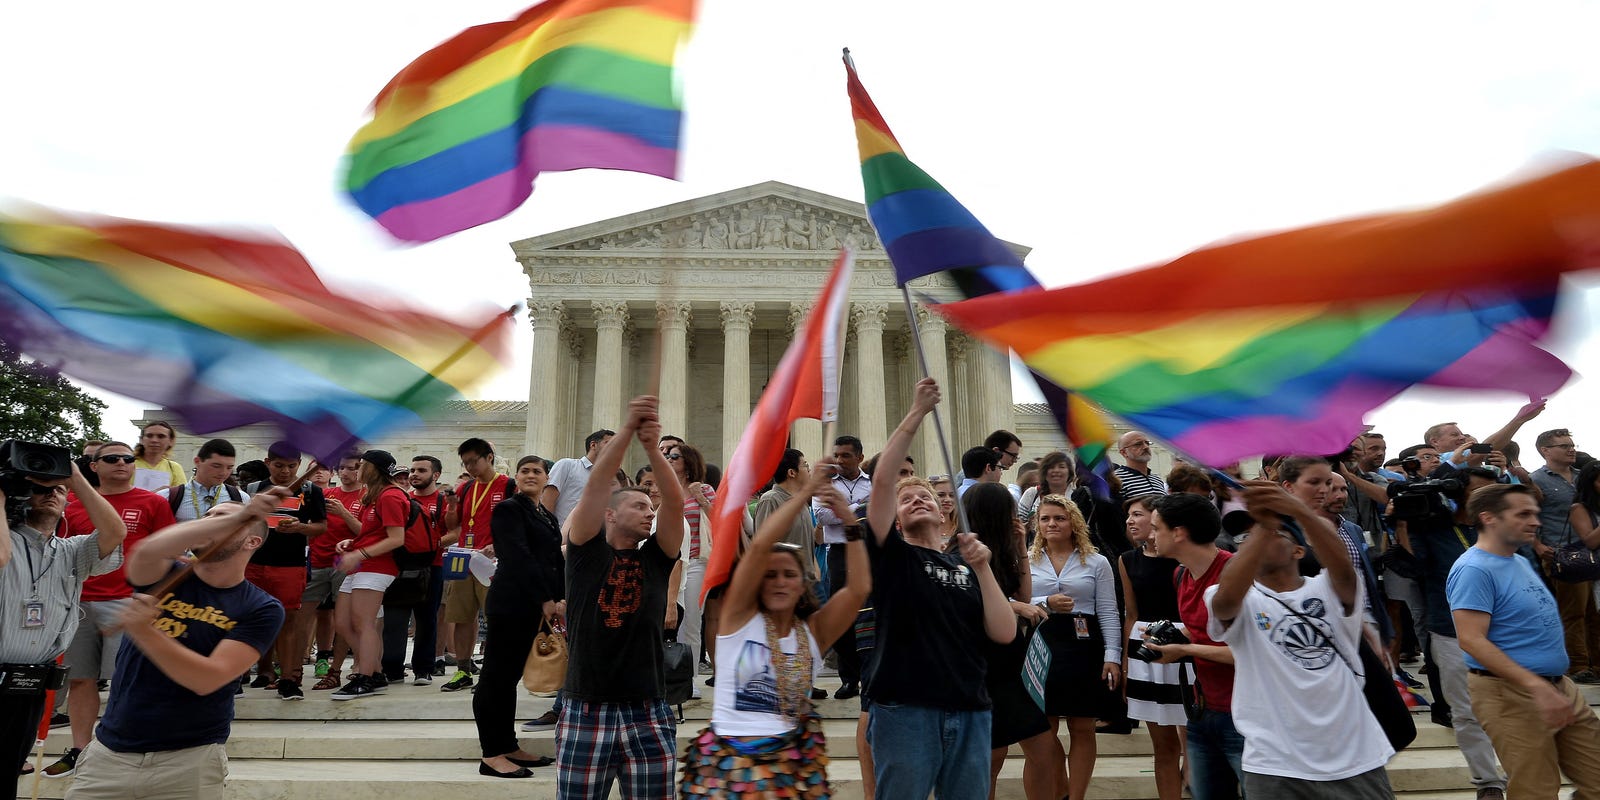 Supreme Court to debate whether businesses may decline to
provide services to same-sex weddings - USA TODAY